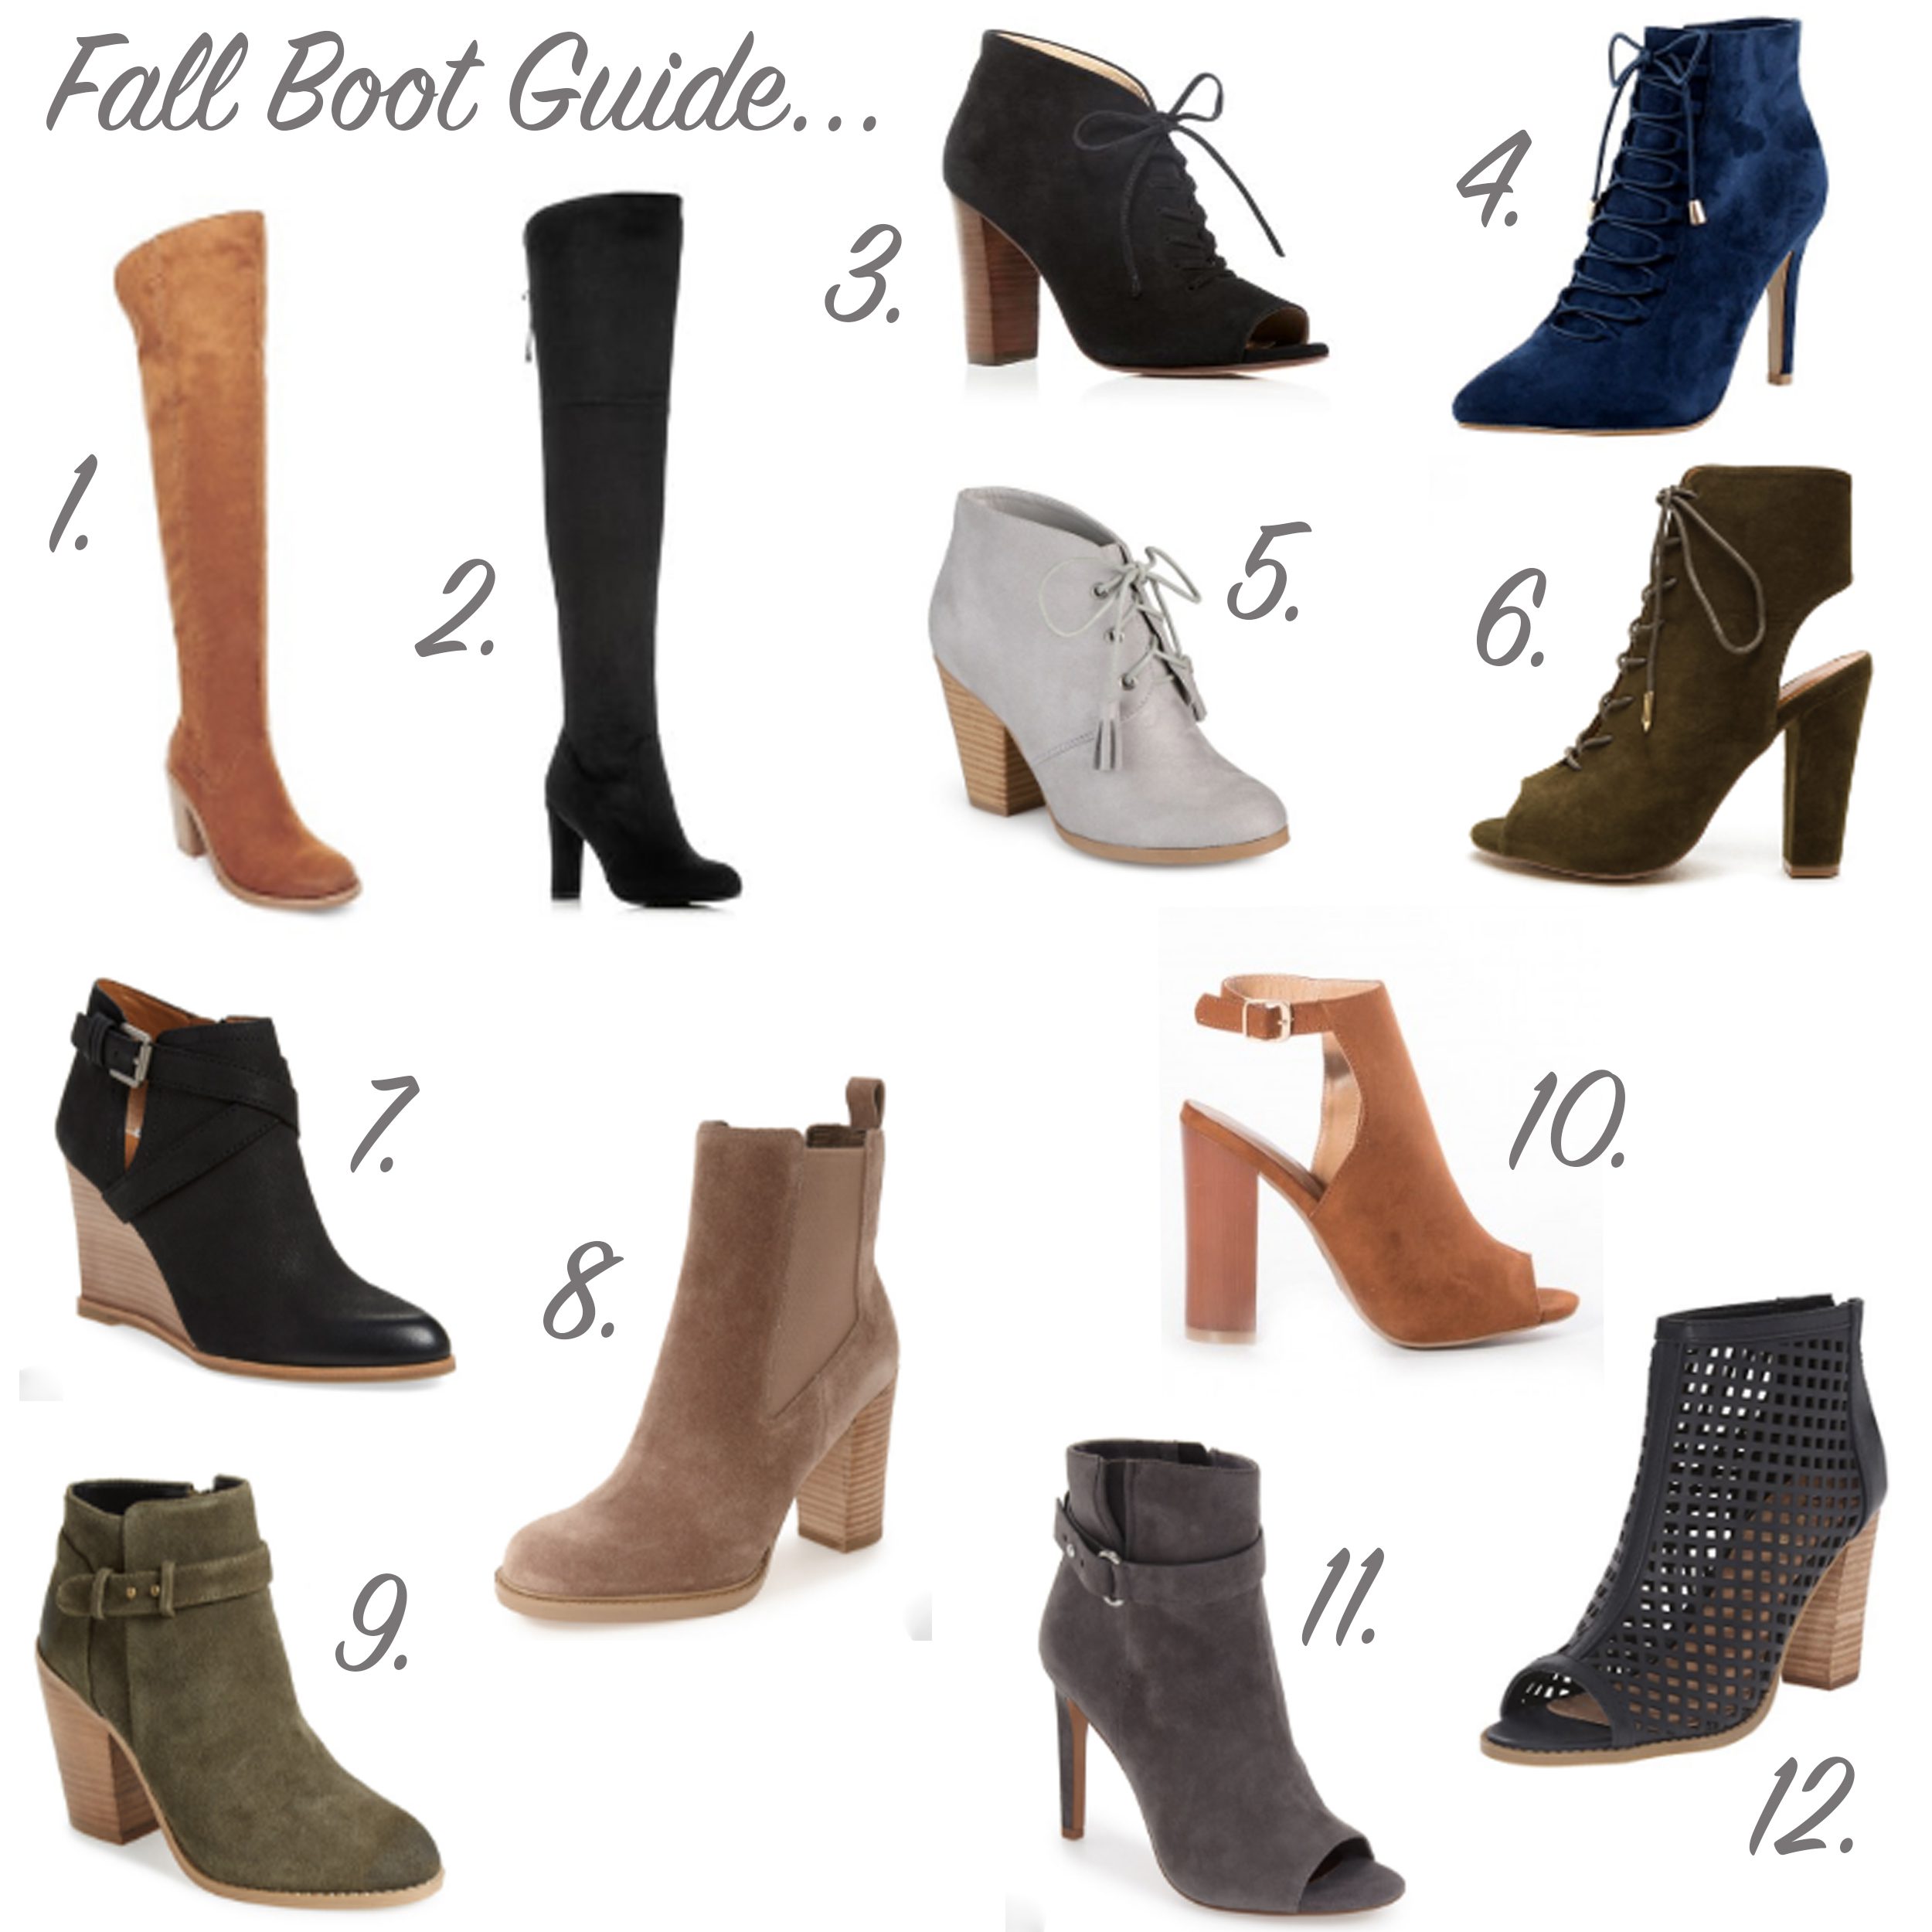 missyonmadison, melissa tierney, fall style, fall boot guide, fall boots, fall trends, fall shoes, fall boot trends, nordstrom, shoes, affordable boots, la blogger, blogged, la style, blogger style, fall footwear, go jane, shoetopia, nordstrom shoe guide, boots under 200, fall 2016 style, fall 2016 boot guide, lace up booties, ankle boots, otk boots, over the knee boots, suede boots, peep toe booties,